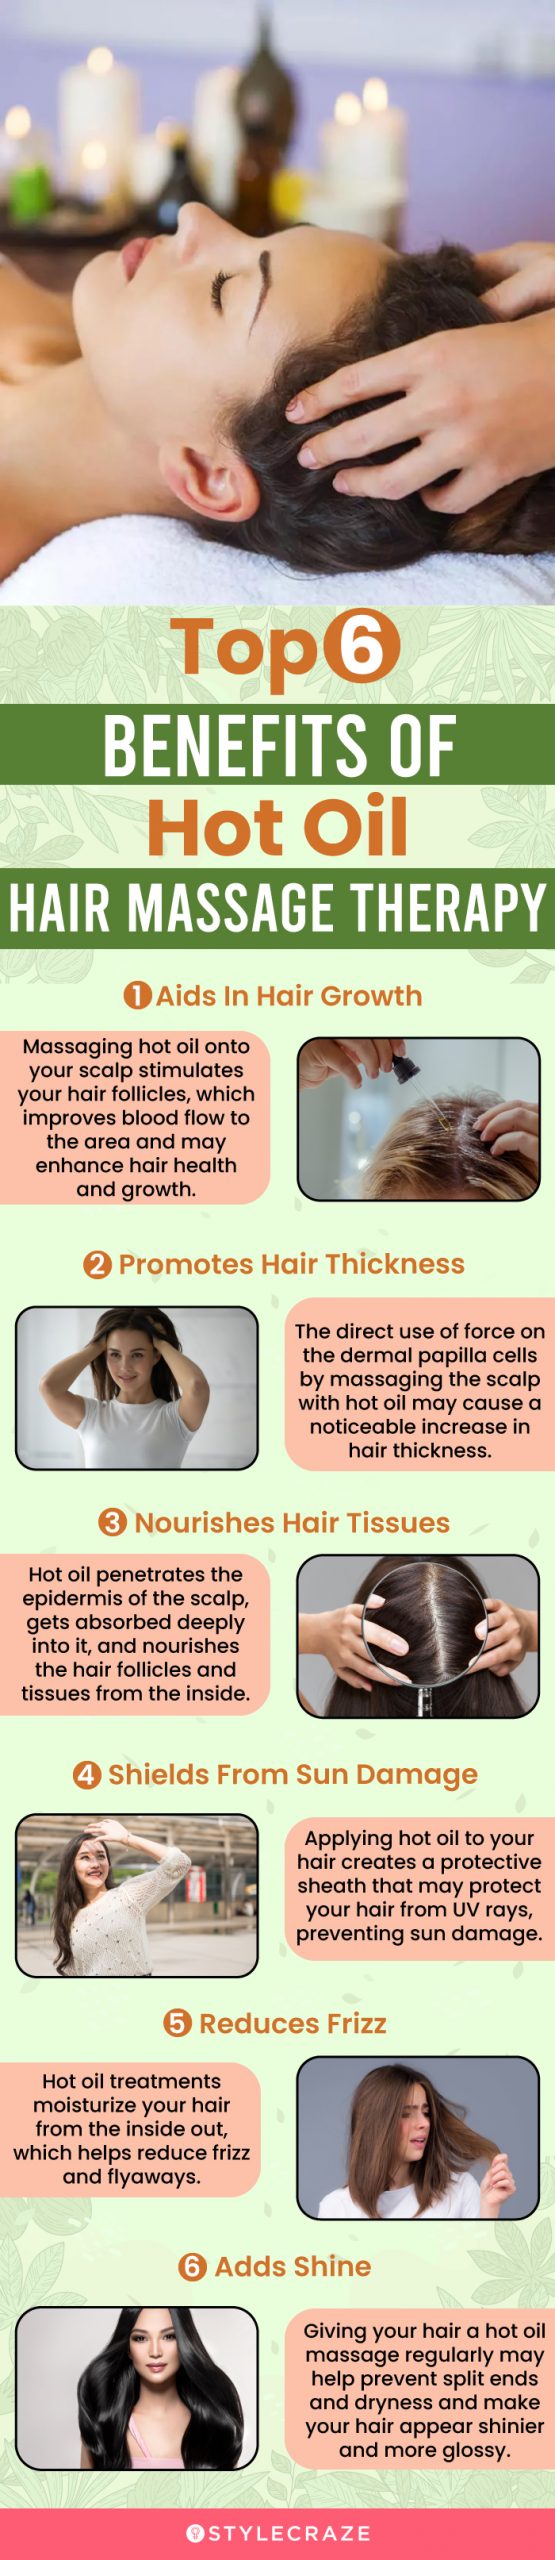 top 6 benefits of hot oil hair massage therapy (infographic)